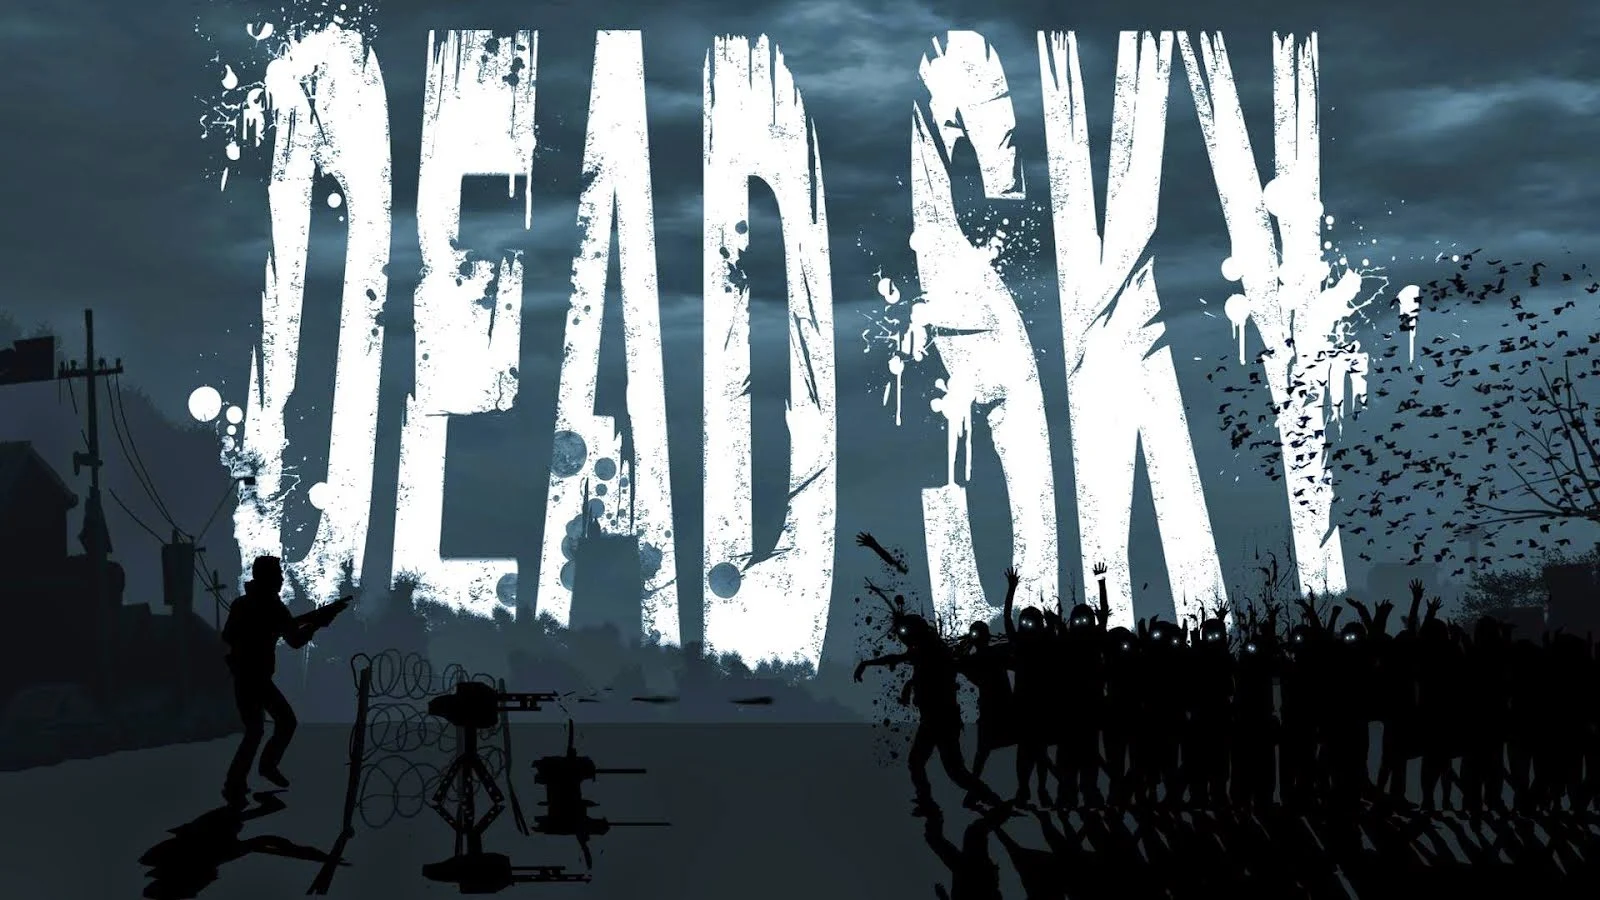 DEAD SKY: FULL GAME FREE DOWNLOAD